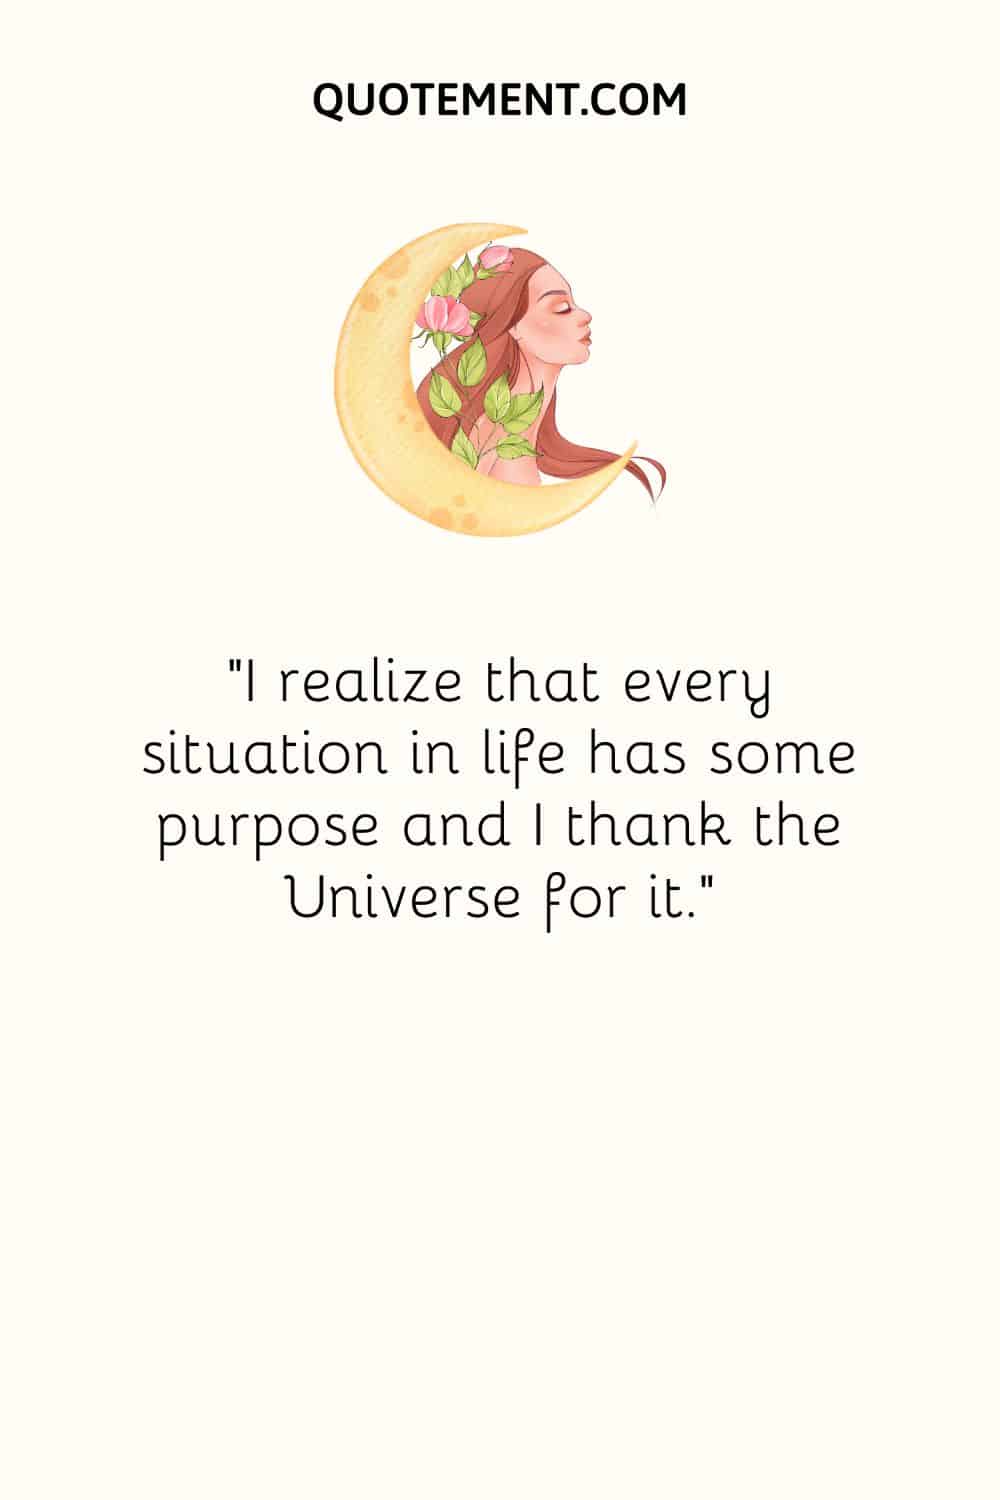 I realize that every situation in life has some purpose and I thank the Universe for it